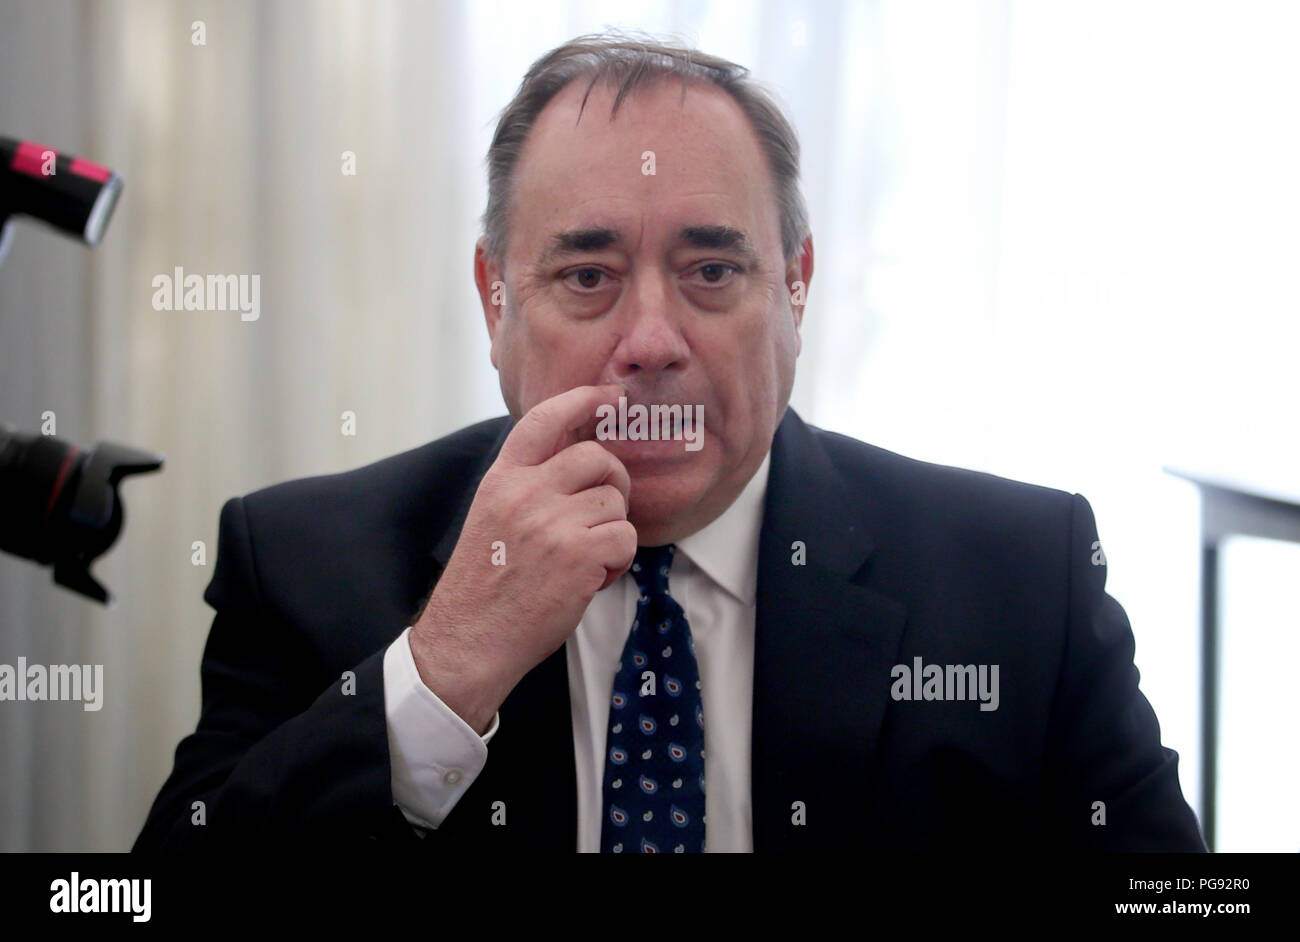 The former first minister of Scotland Alex Salmond speaking to the media at the Champany Inn in Linlithgow, West Lothian, after he launched a legal action to contest the complaints process that was activated against him following allegations about his conduct towards two staff members in 2013 - while he was in office. Stock Photo